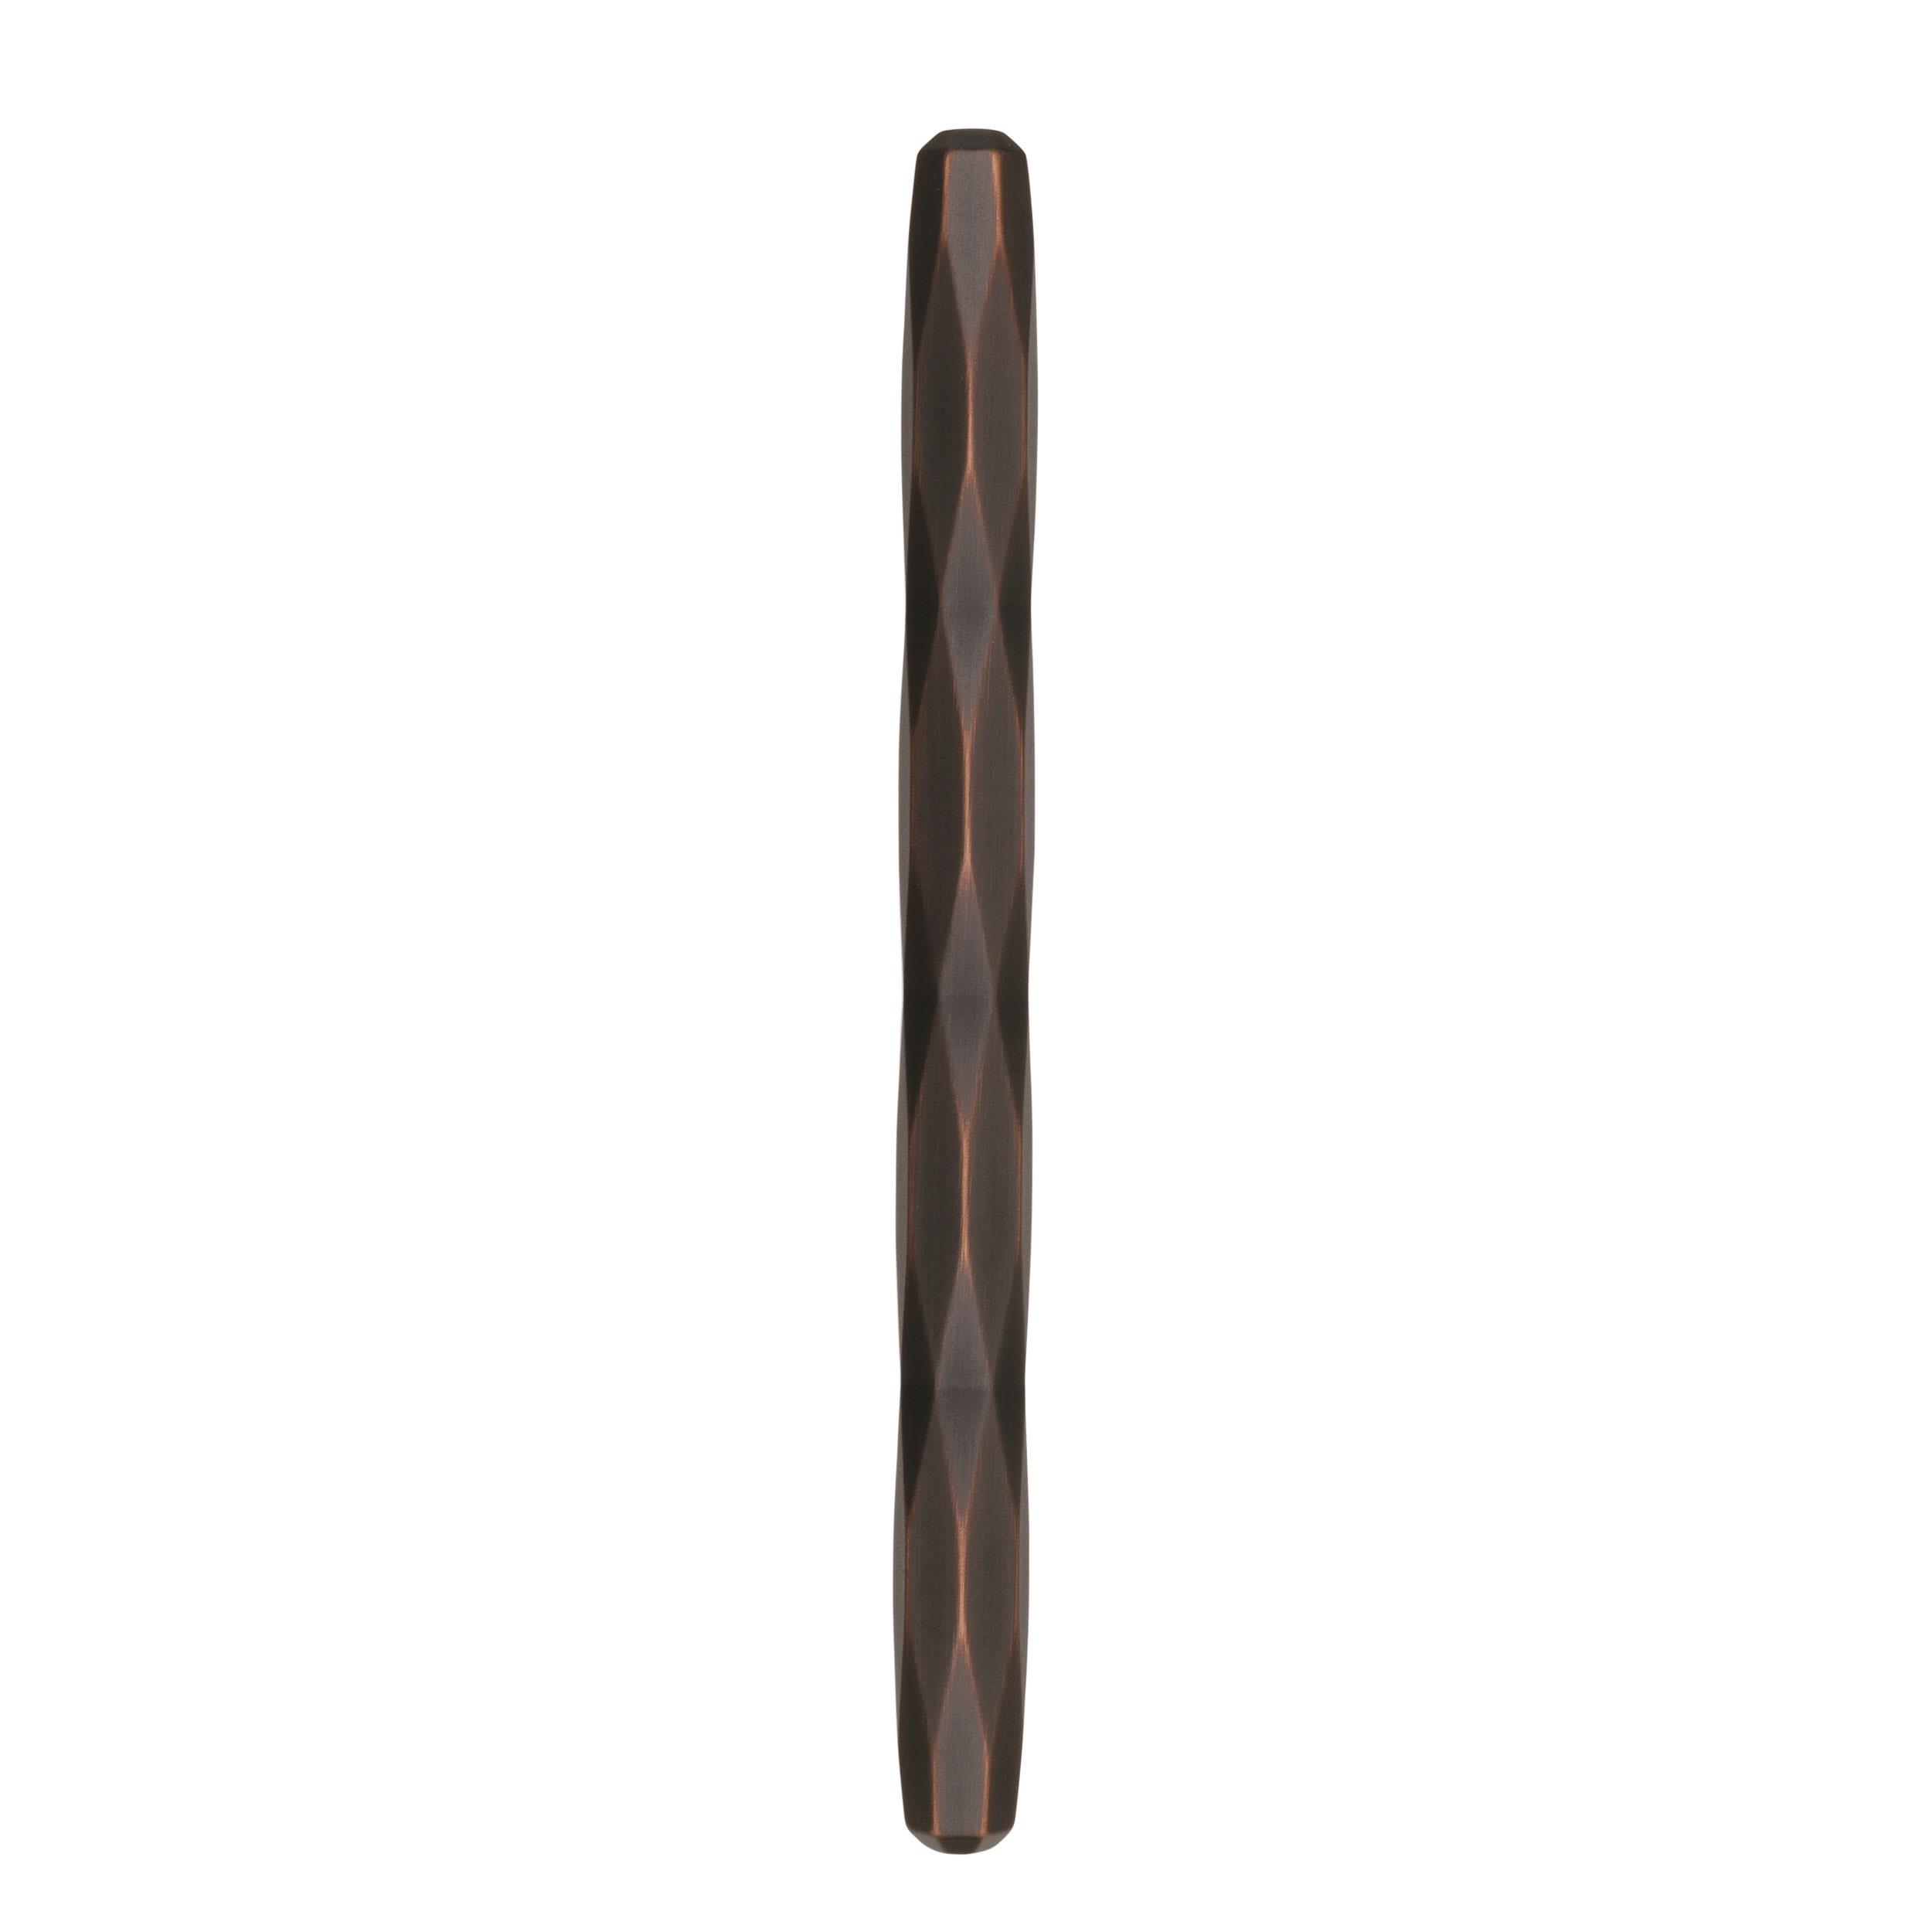 St. Vincent Pull, 5-1/16 in (128 mm), Oil-Rubbed Bronze